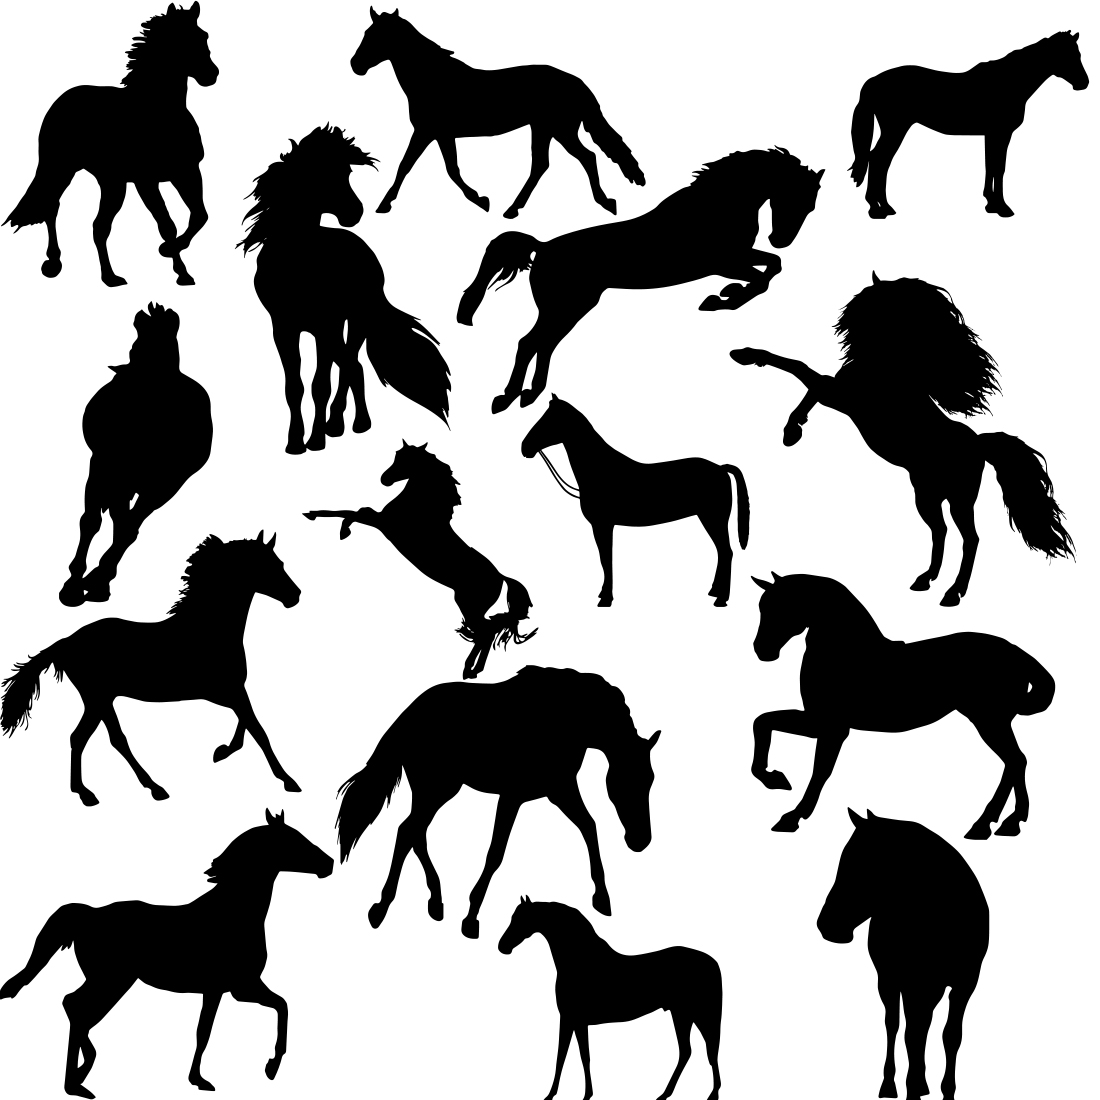 Collection of horses silhouettes on a white background.